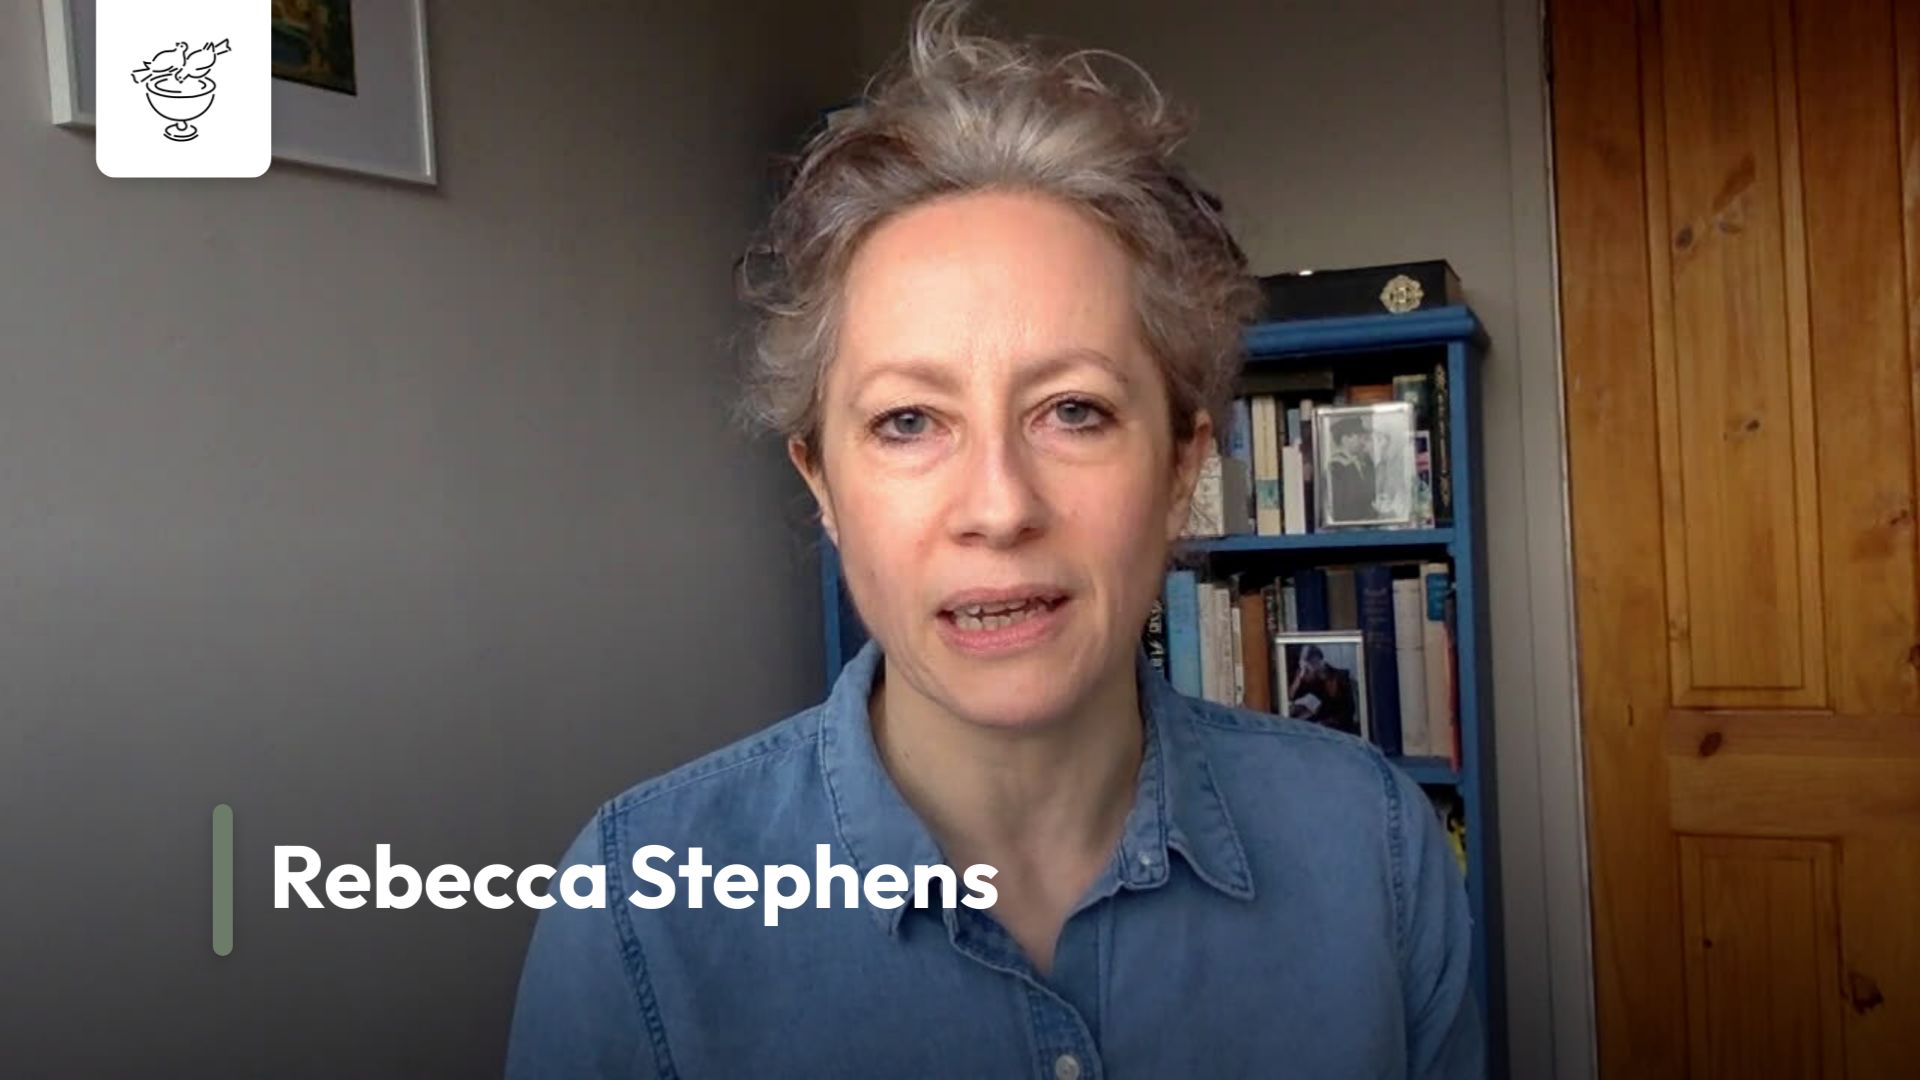 An interview with Rebecca Stephens on Meister Eckhart